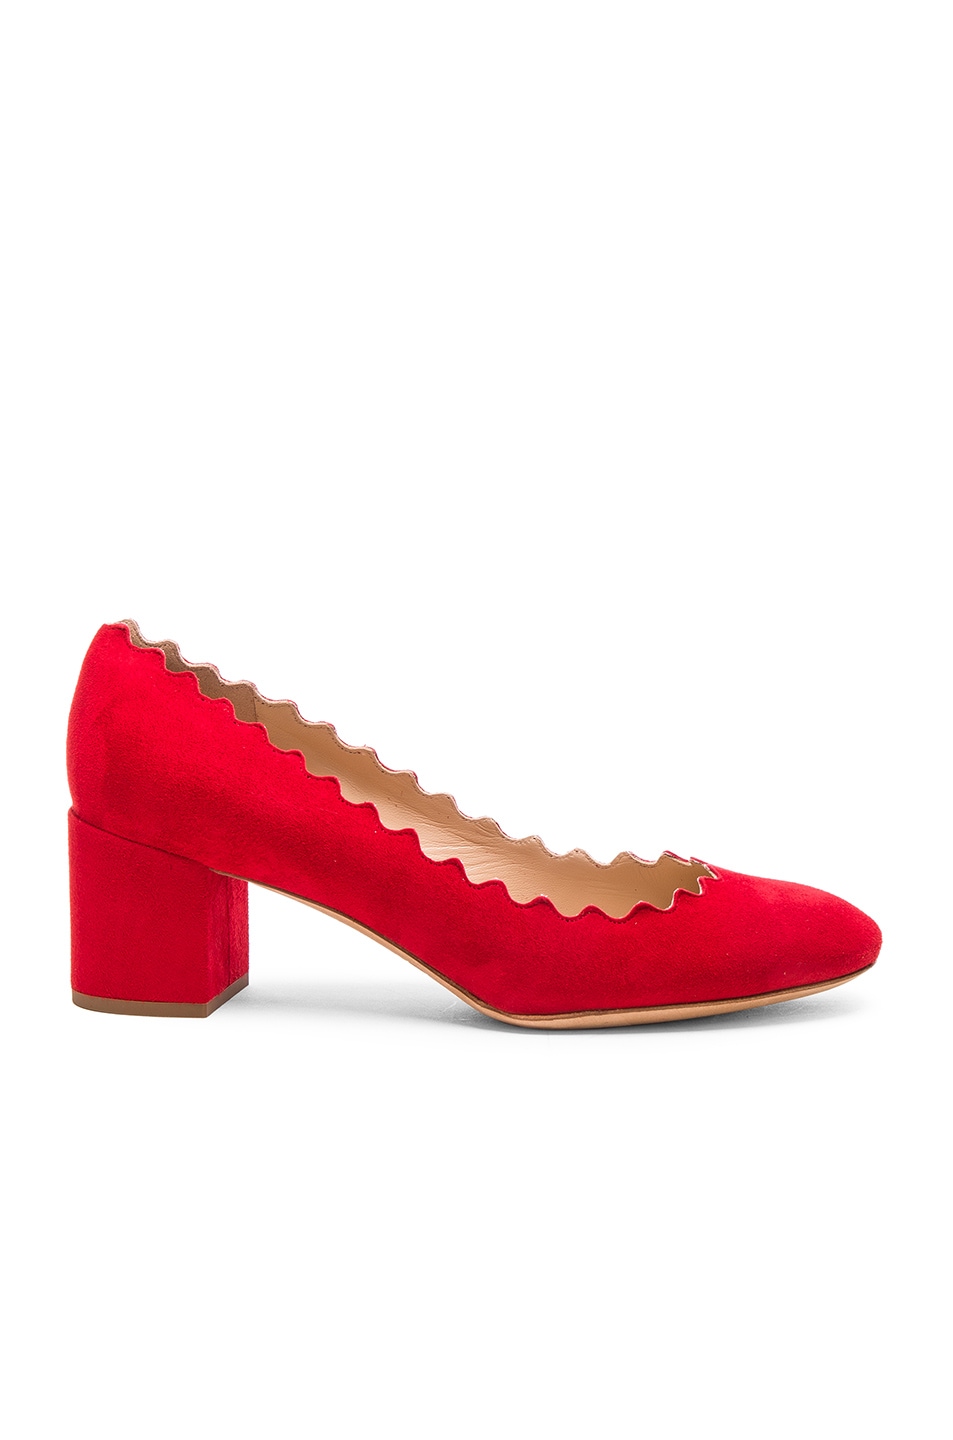 Image 1 of Chloe Suede Scallop Heels in Red